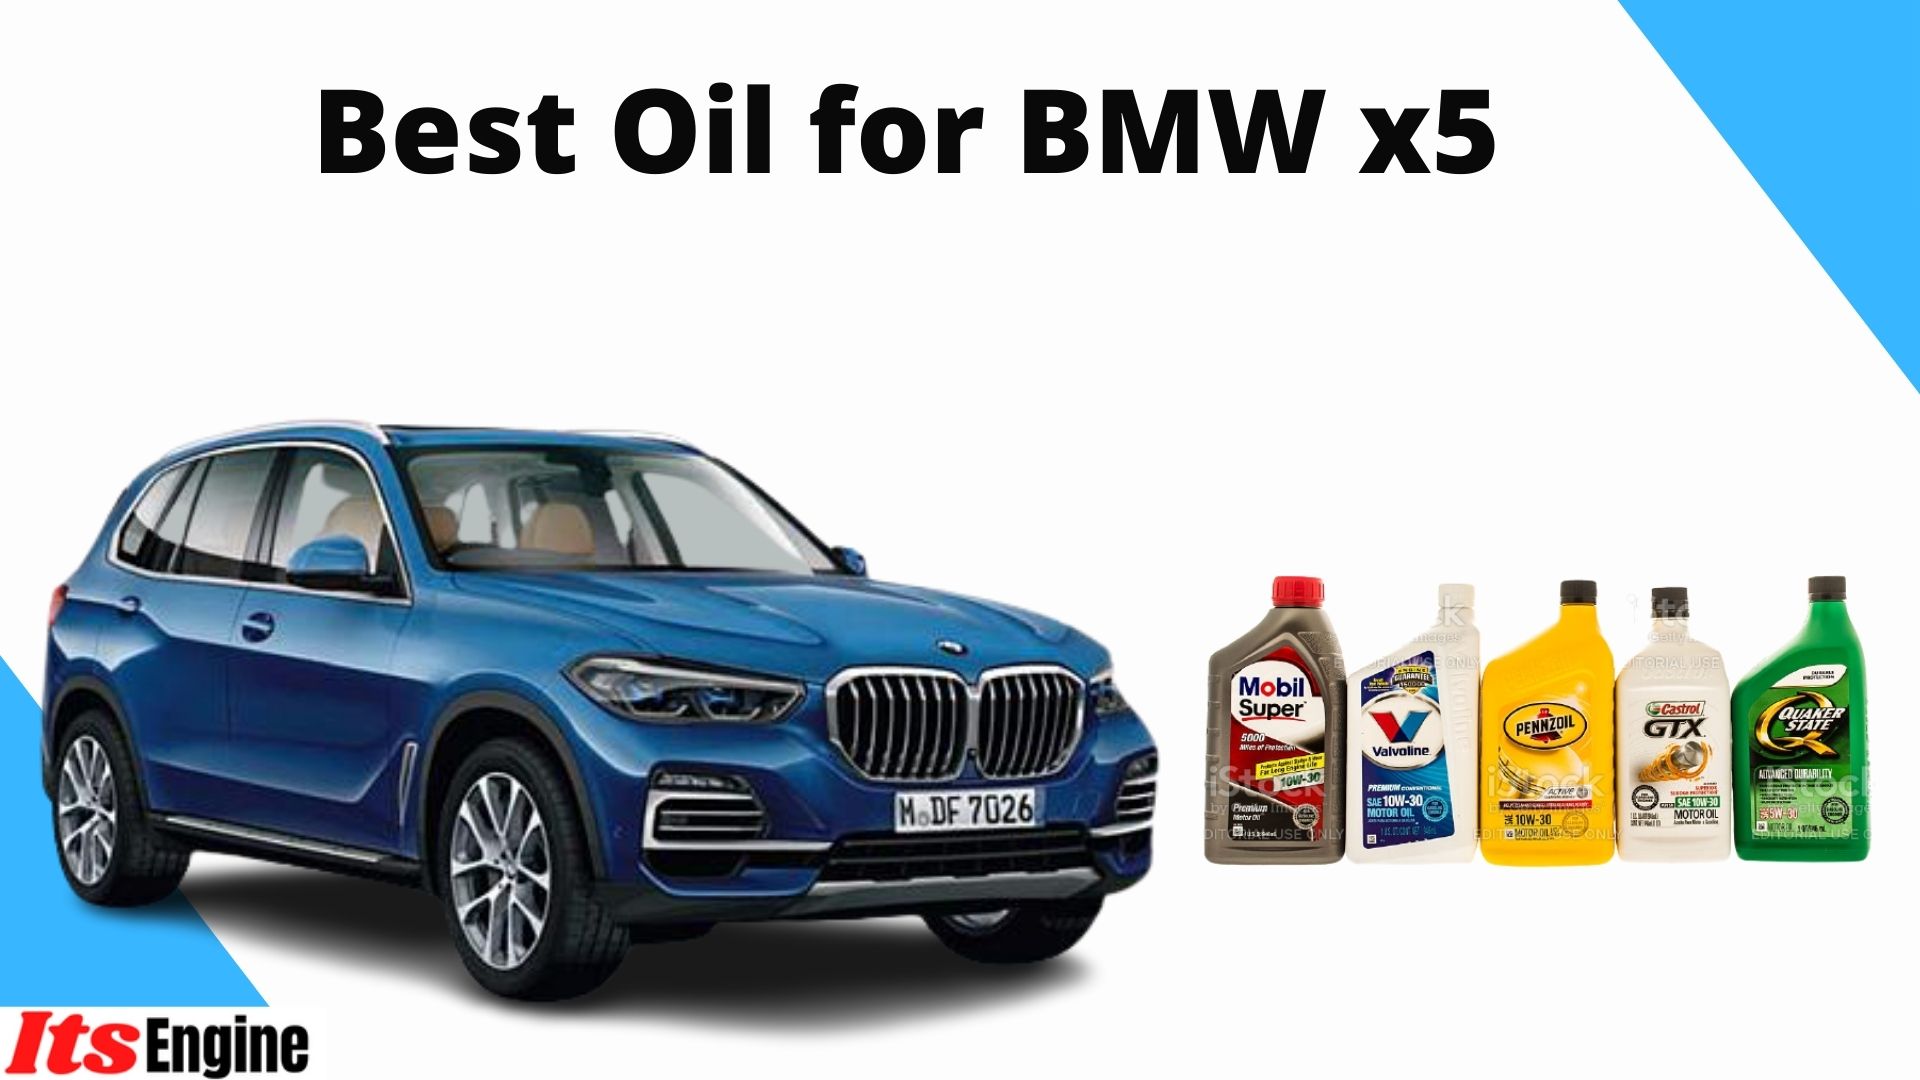 Best Oil for BMW x5